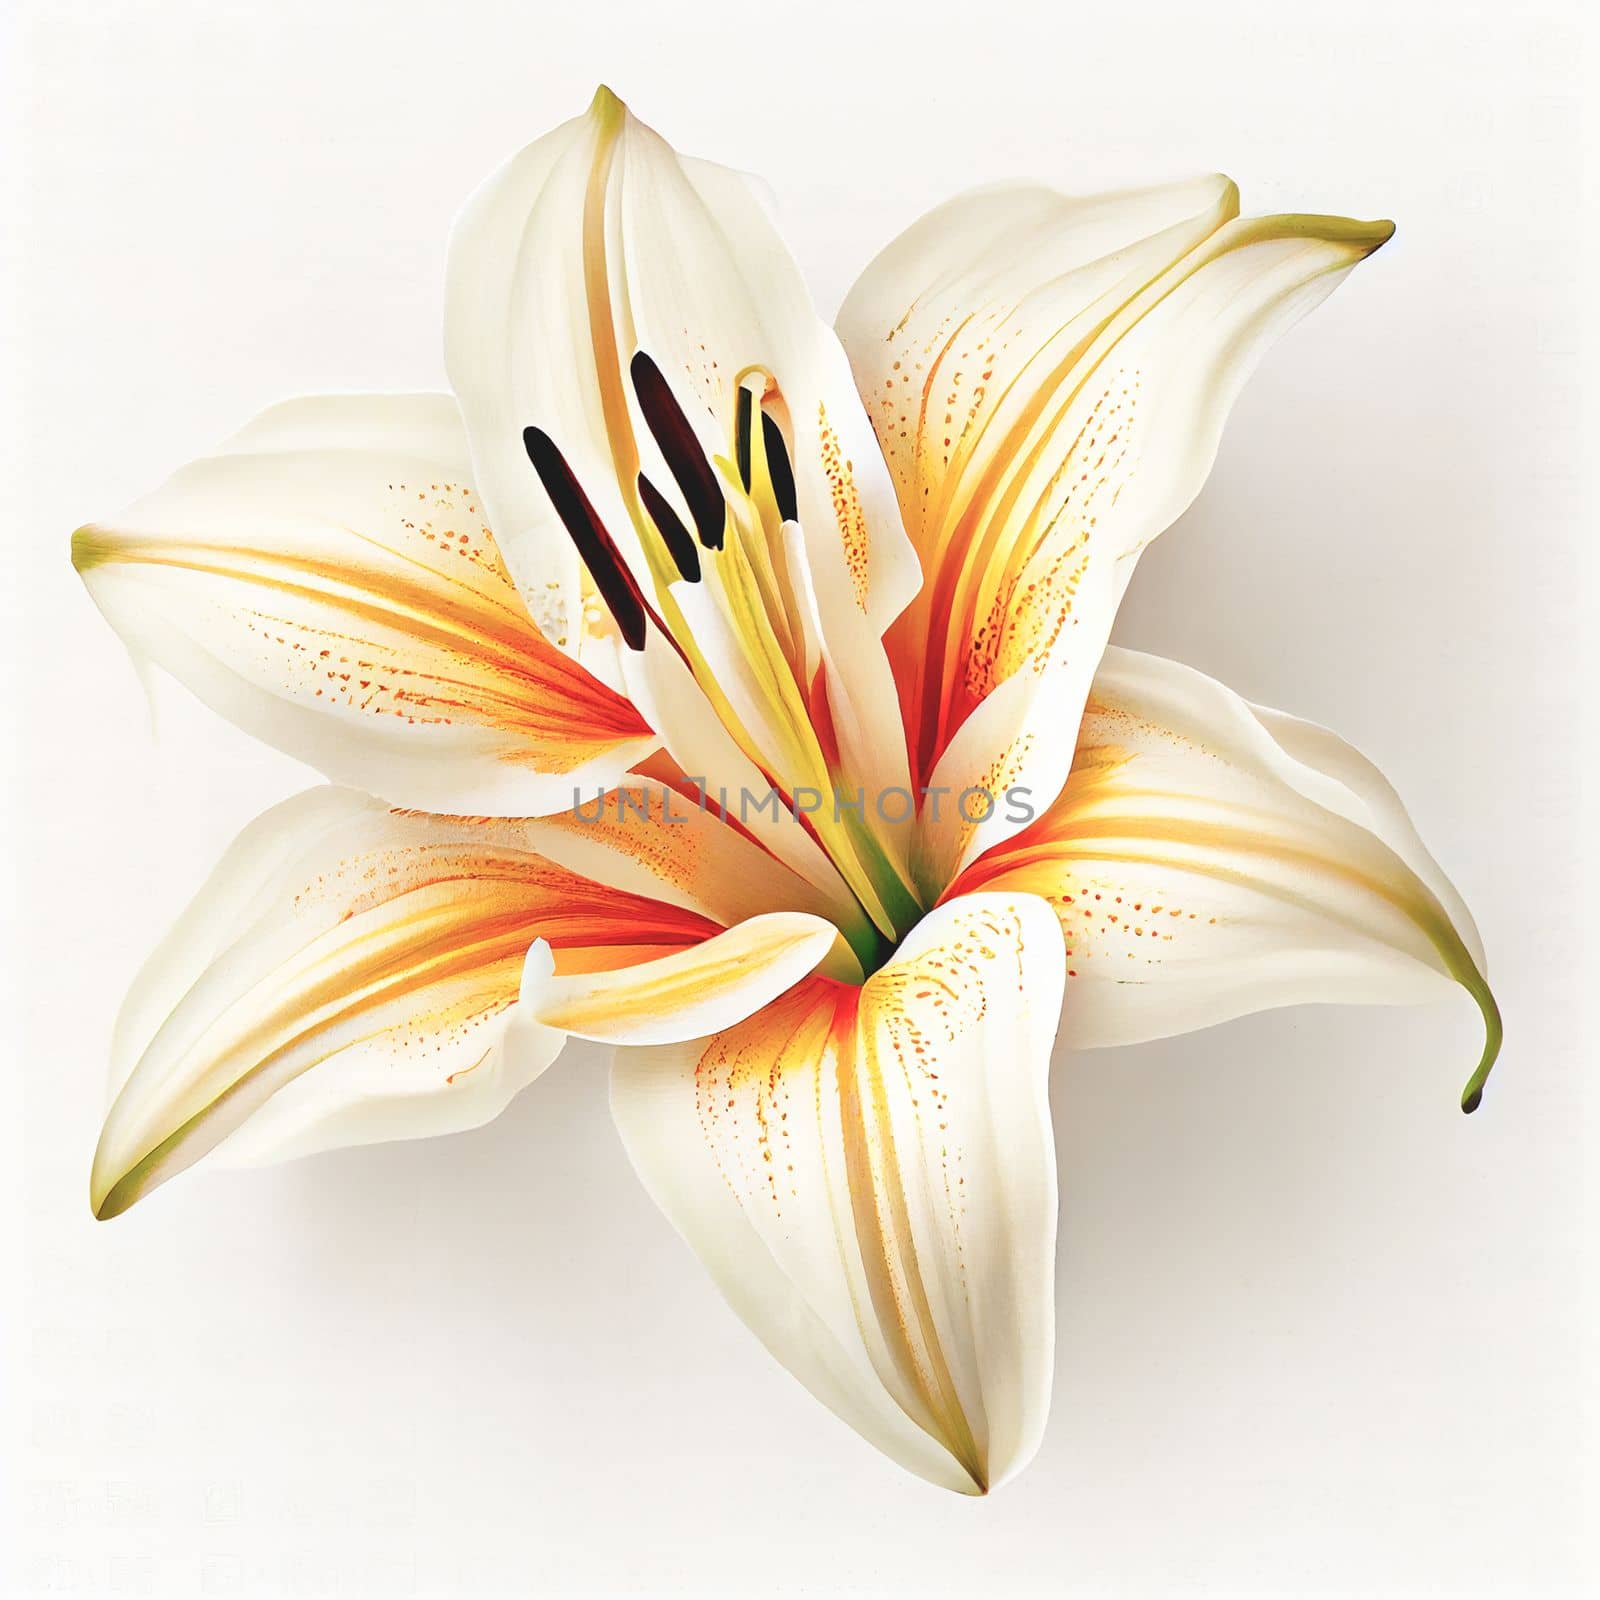 Top view of Lilies flower on a white background, perfect for representing the theme of Valentine's Day.